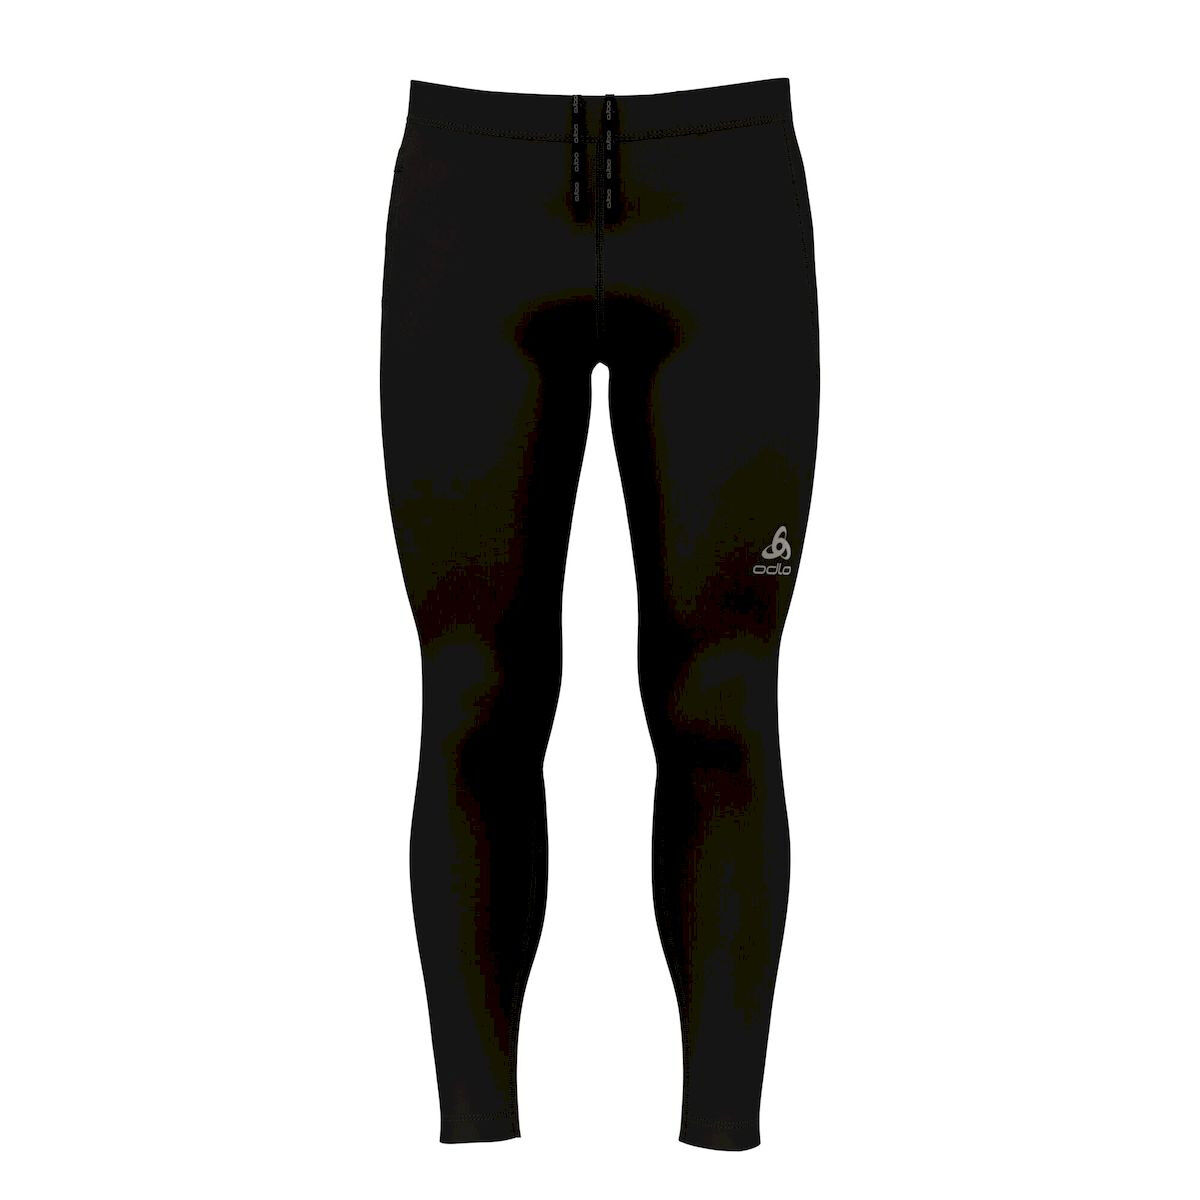 Odlo Tights Essential Warm - Collant running homme | Hardloop